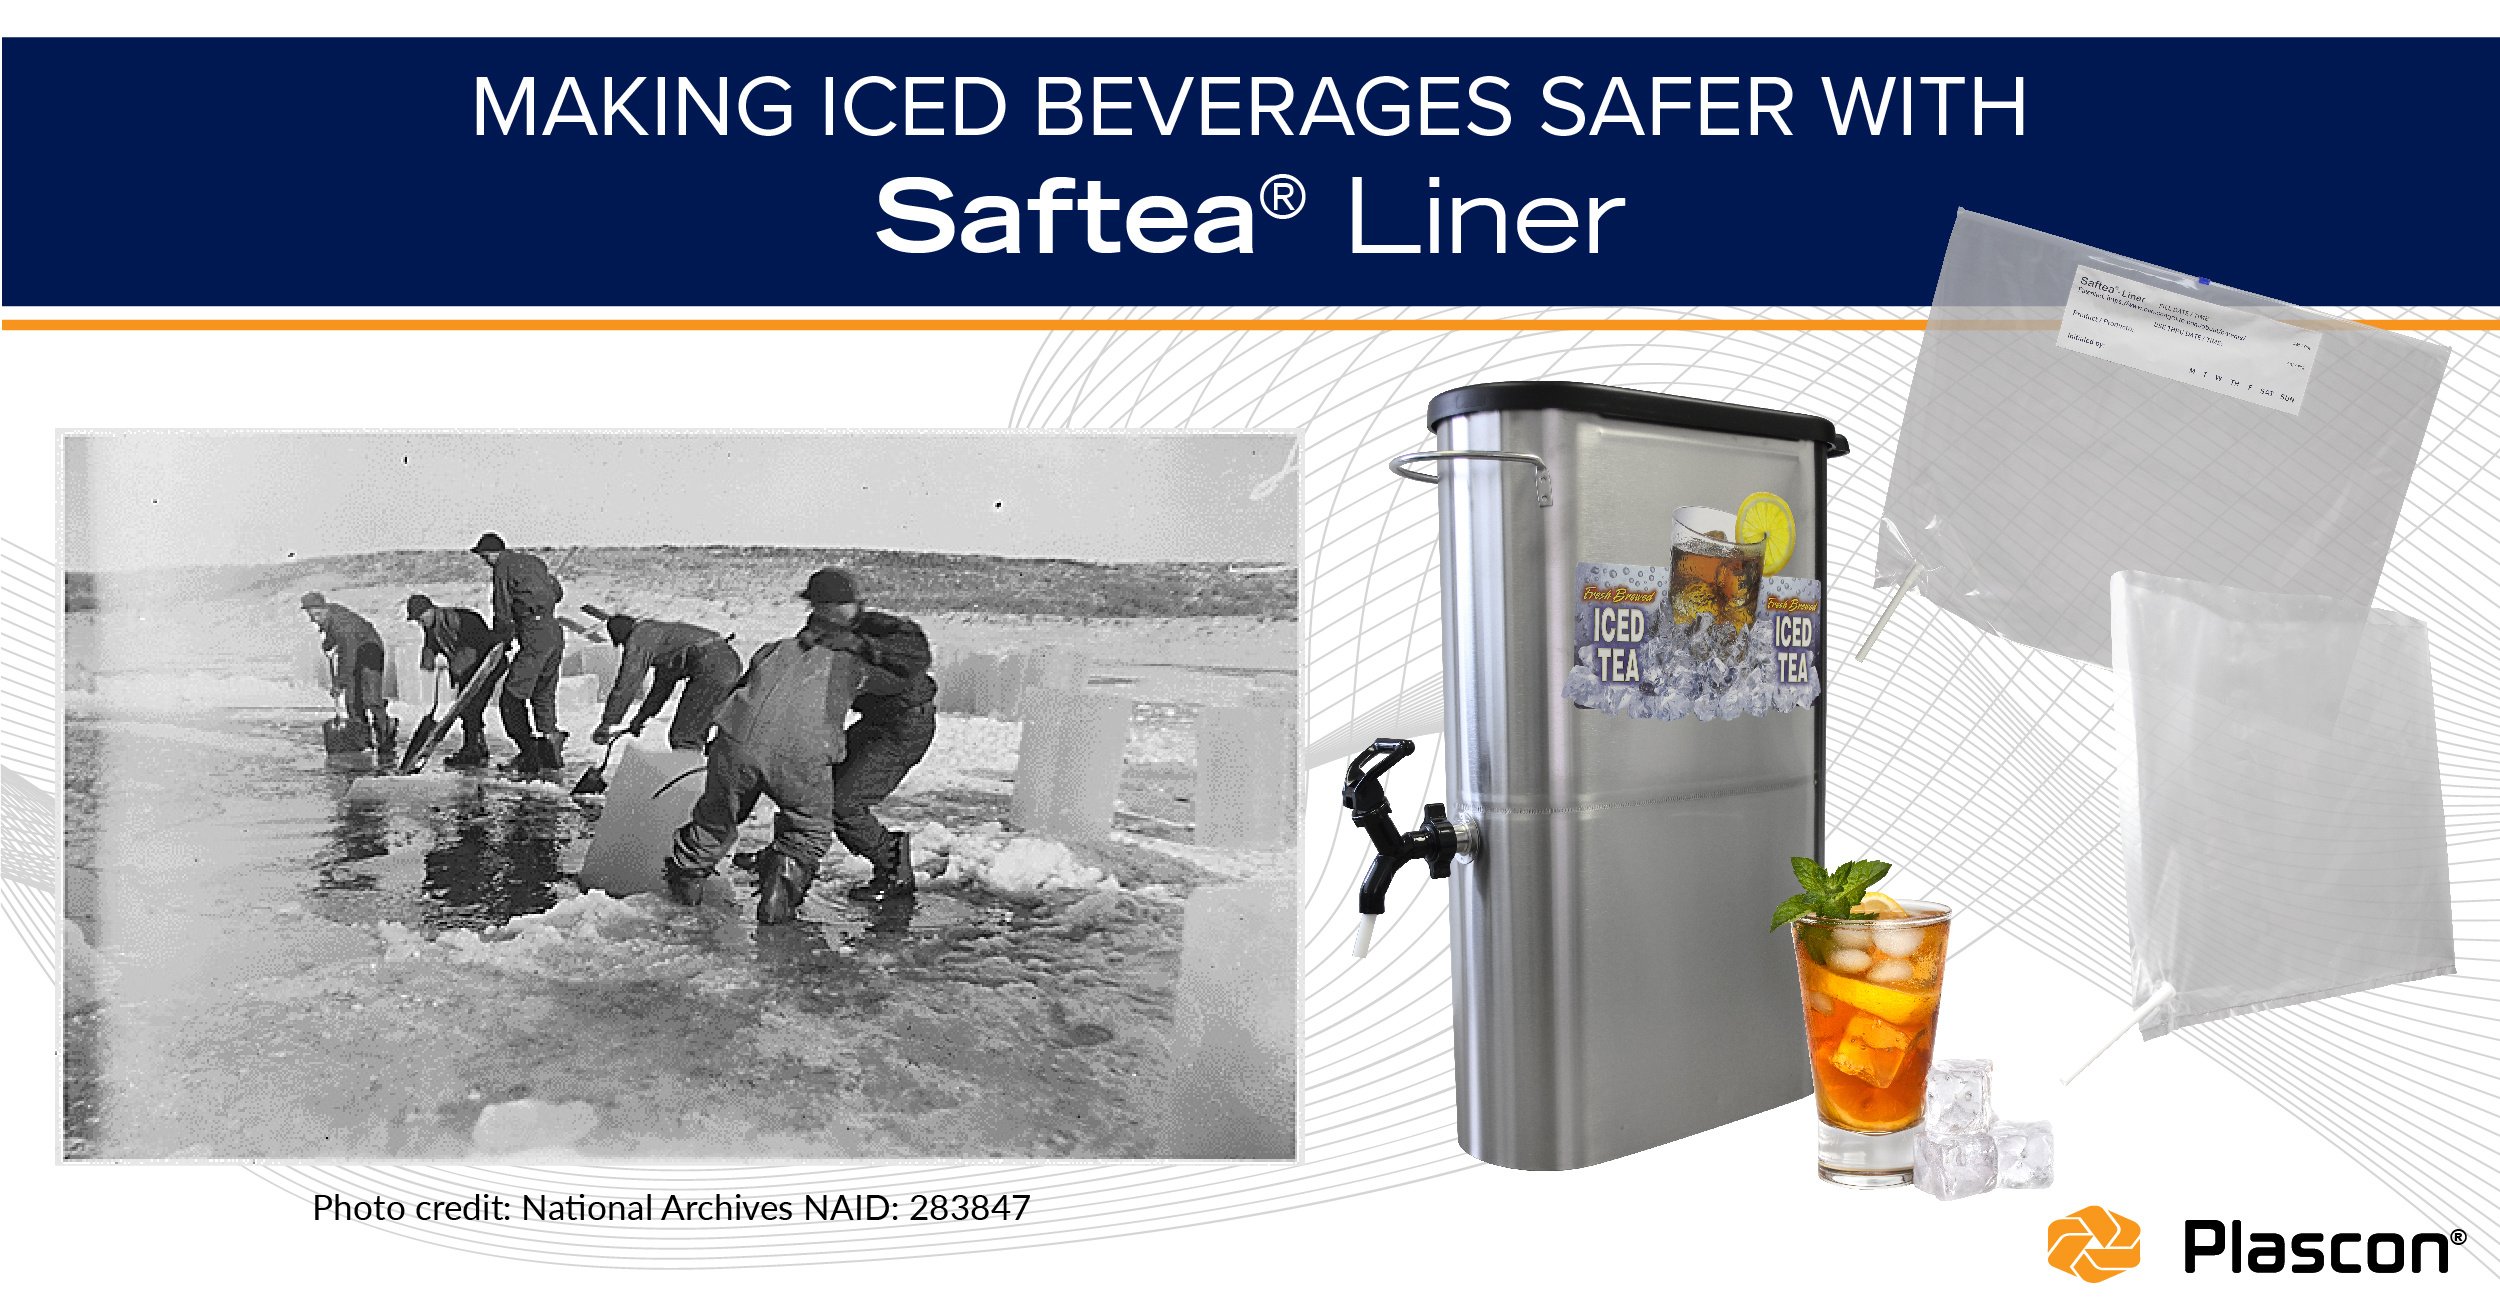 From the early days of making ice to modern day iced tea, Saftea Liner provides superior sanitation and a fresher taste!